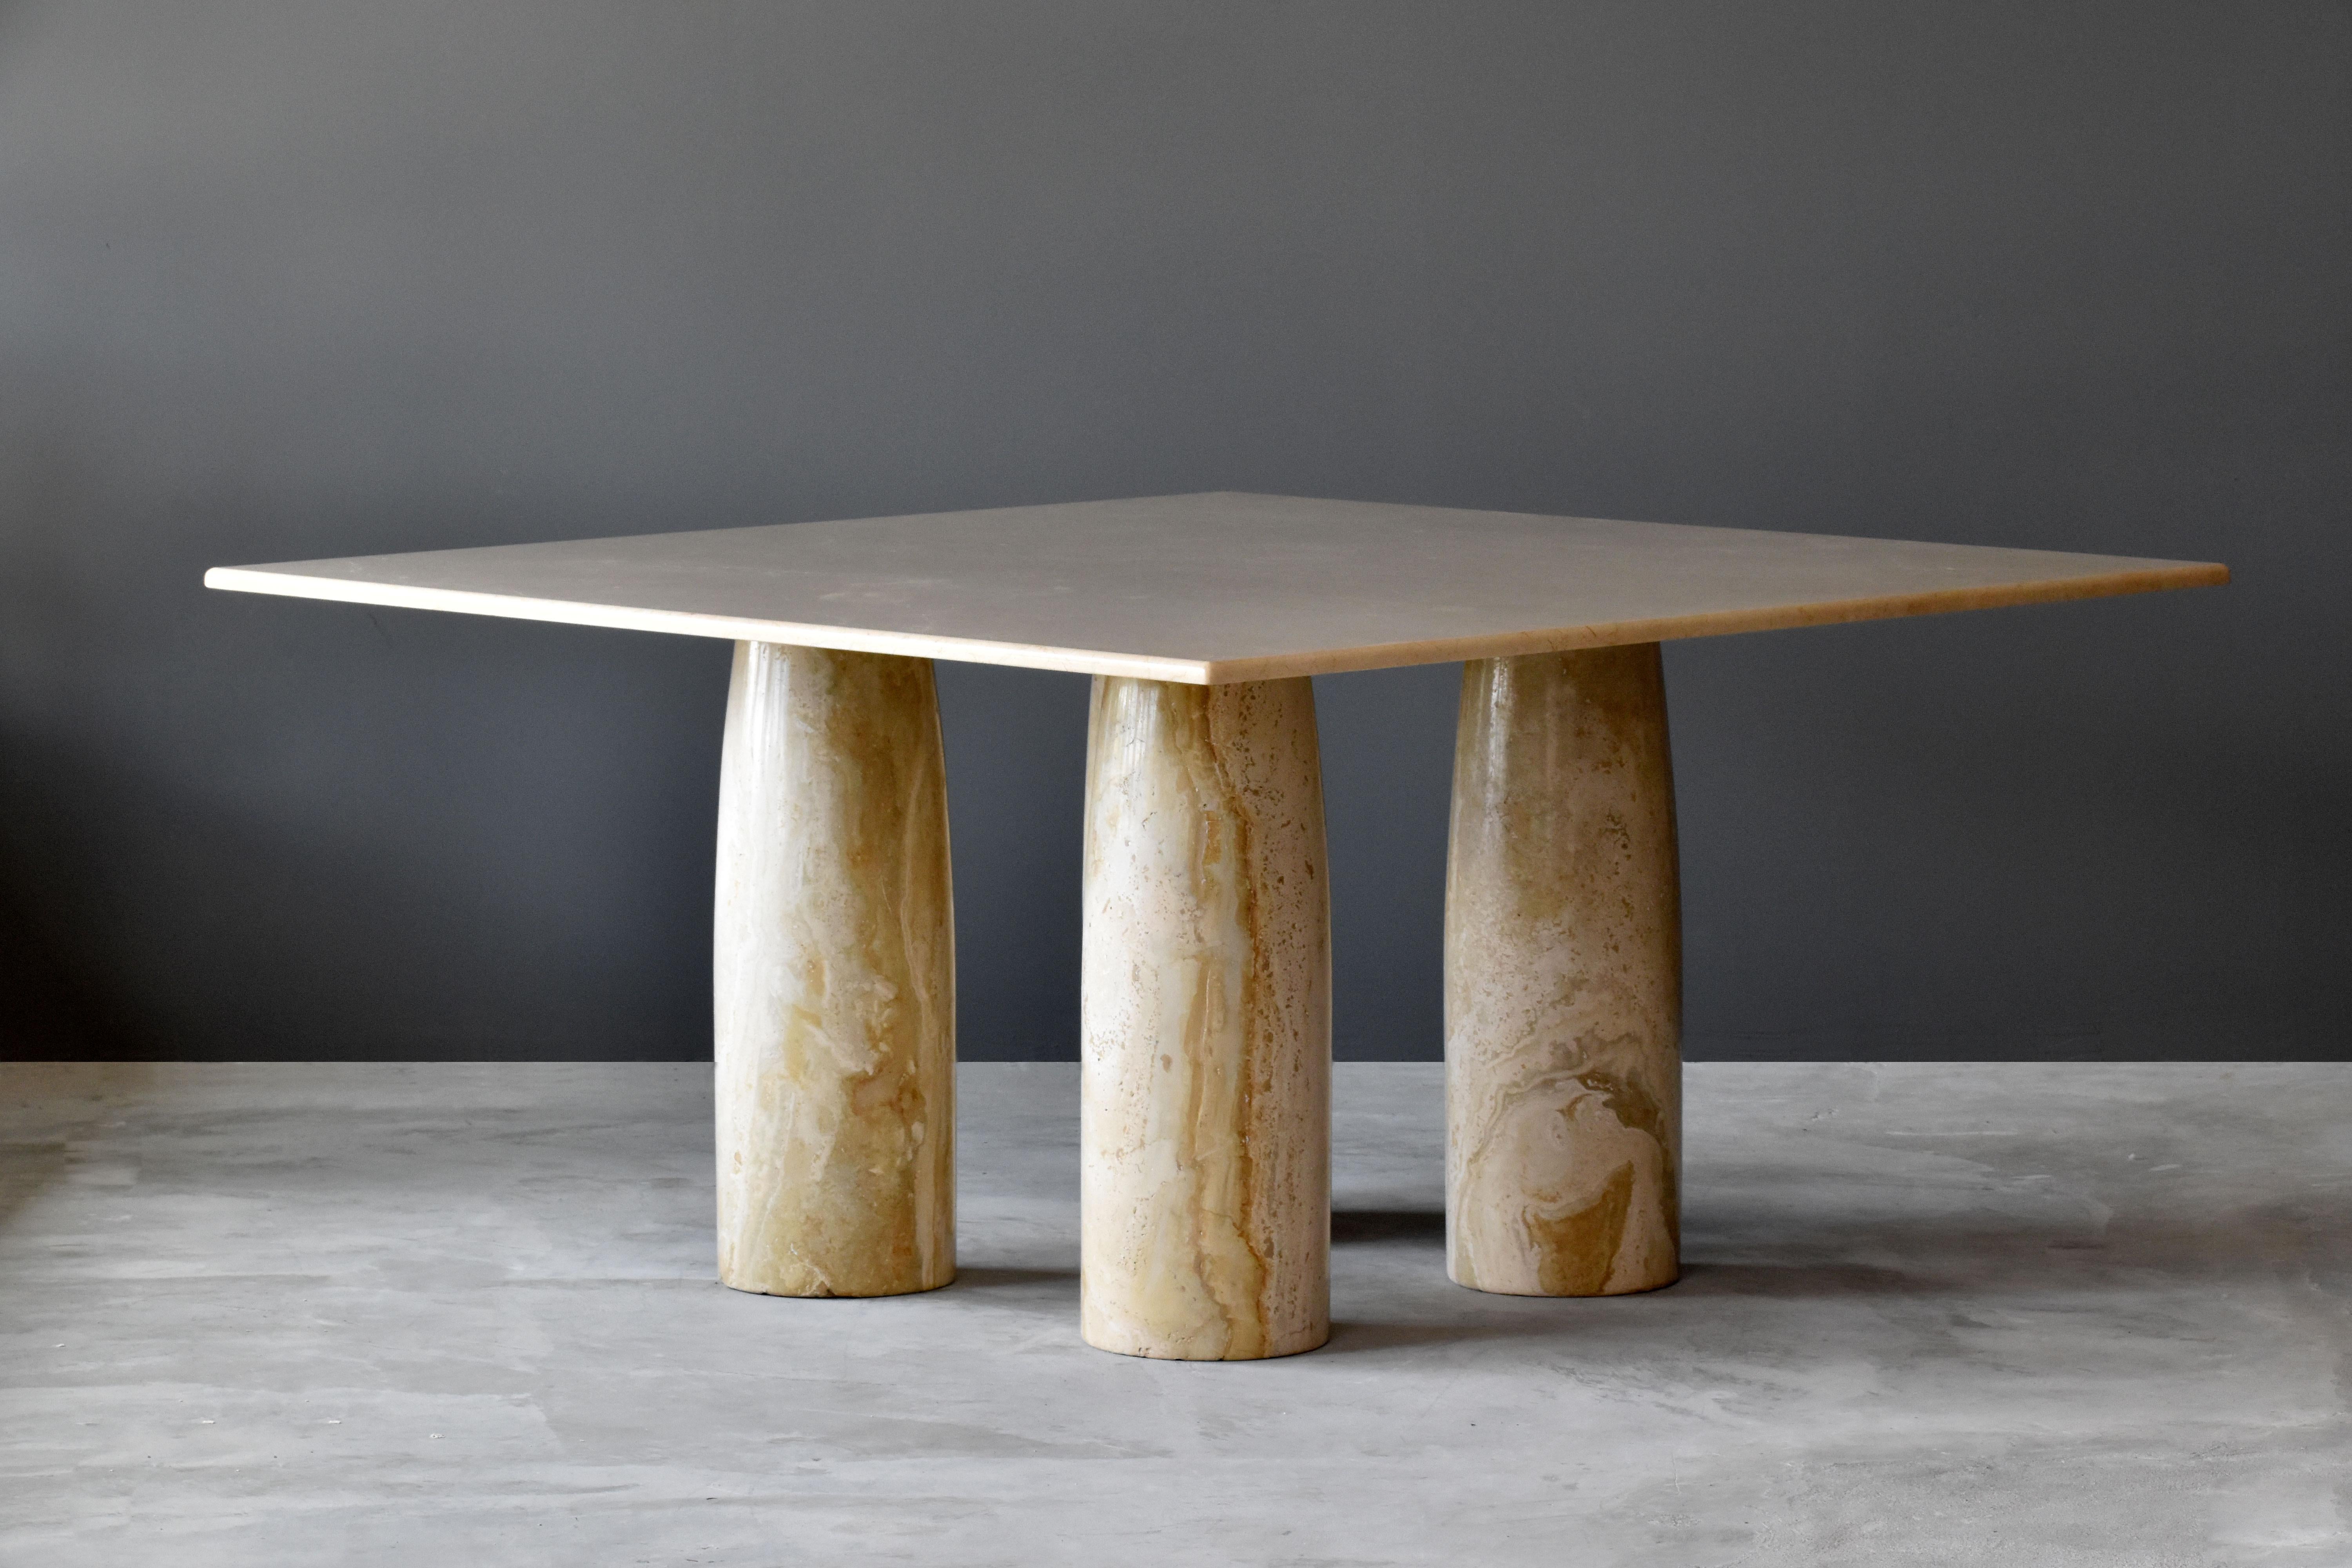 A large dining table designed by Milanese architect Mario Bellini. Produced by Cassina, 1970s. Produced in massive marble. 

Bellini mixes Minimalist form with inspiration from ancient Roman columns. The tabletop rests on modular legs, allowing it's